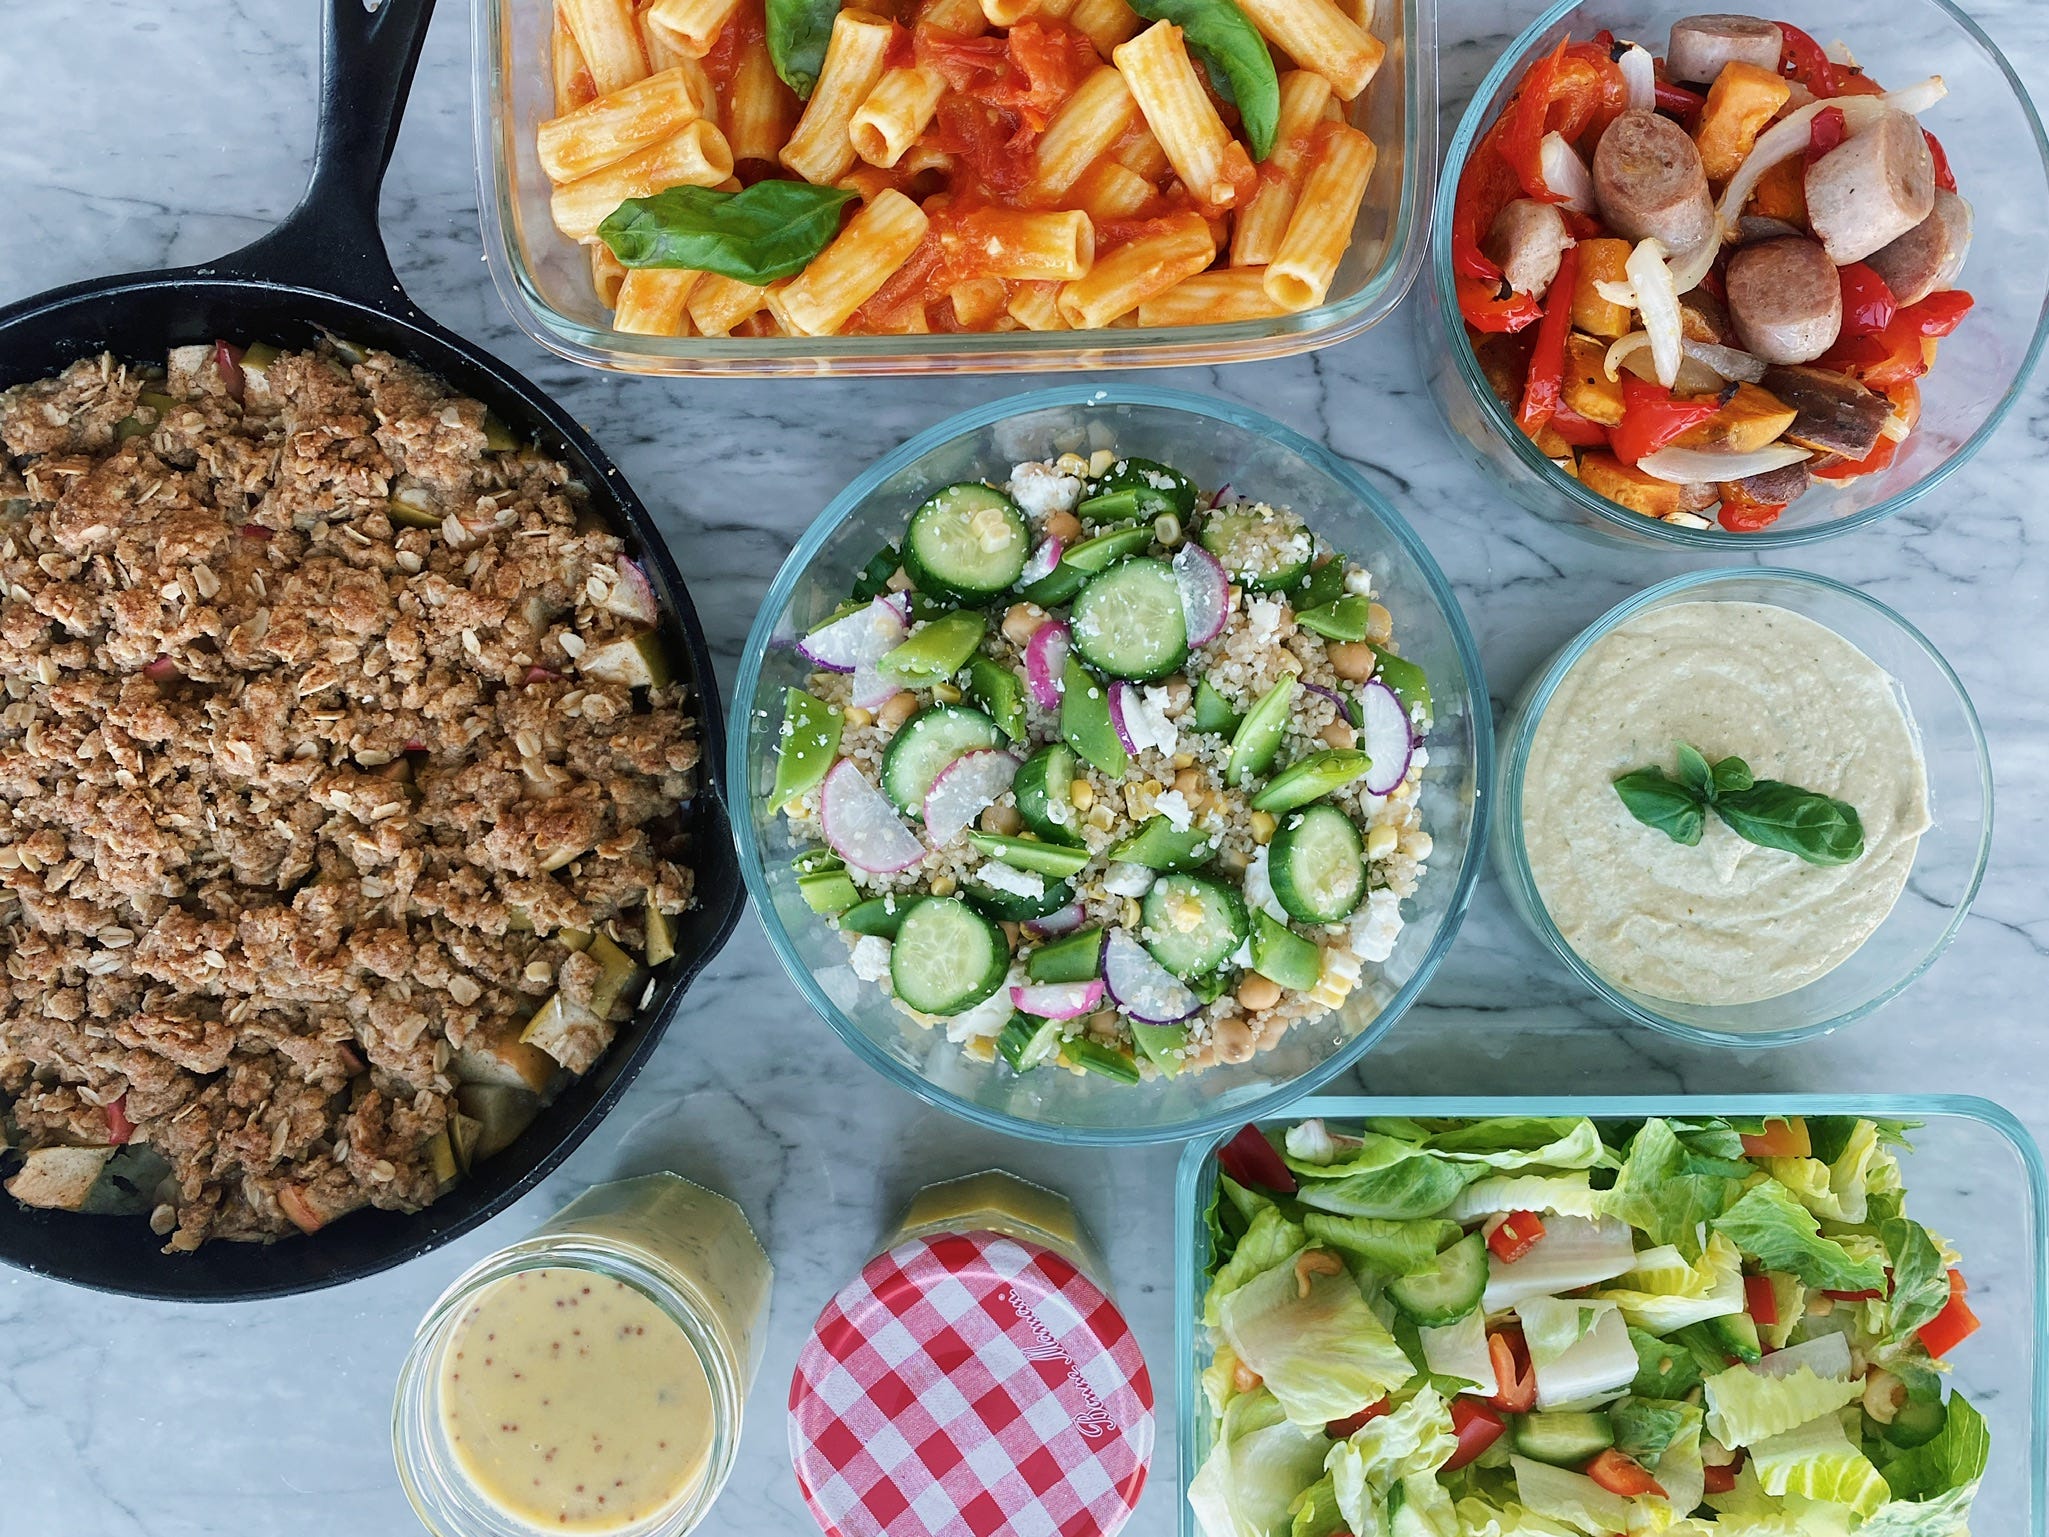 9 Meal Prep Ideas to Save Time in the Kitchen - Downshiftology